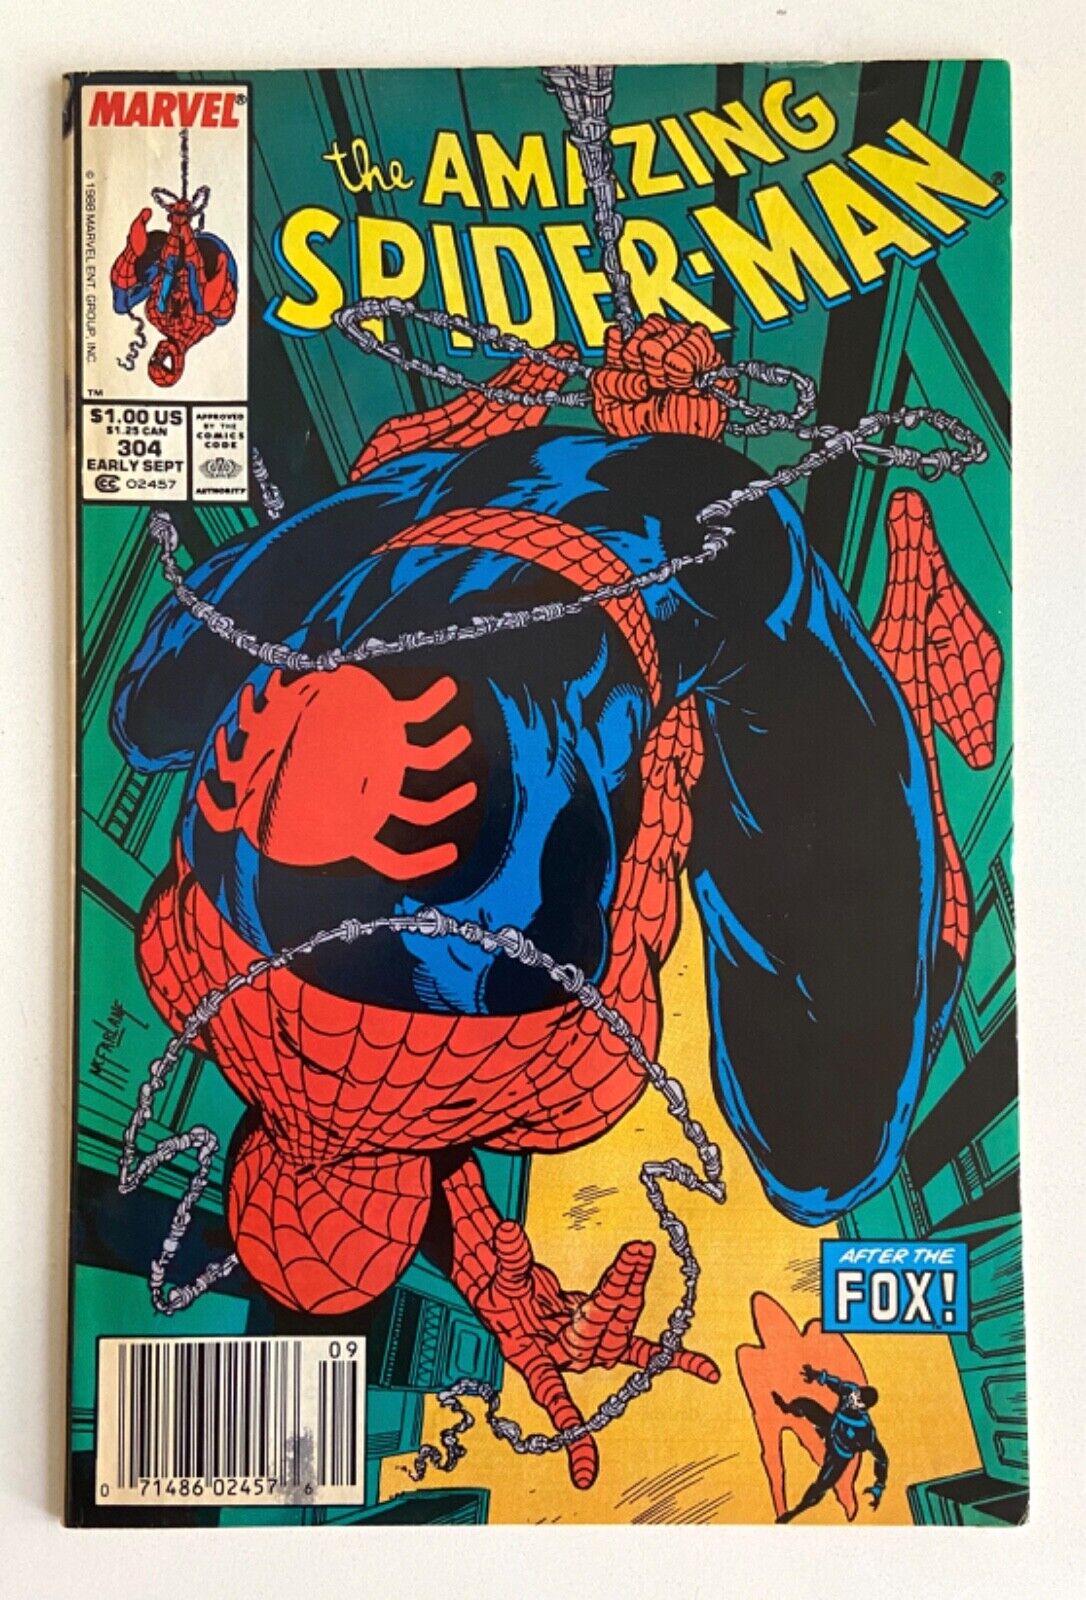 Marvel THE AMAZING SPIDER-MAN #304 (Early September 1988) Todd McFarlane